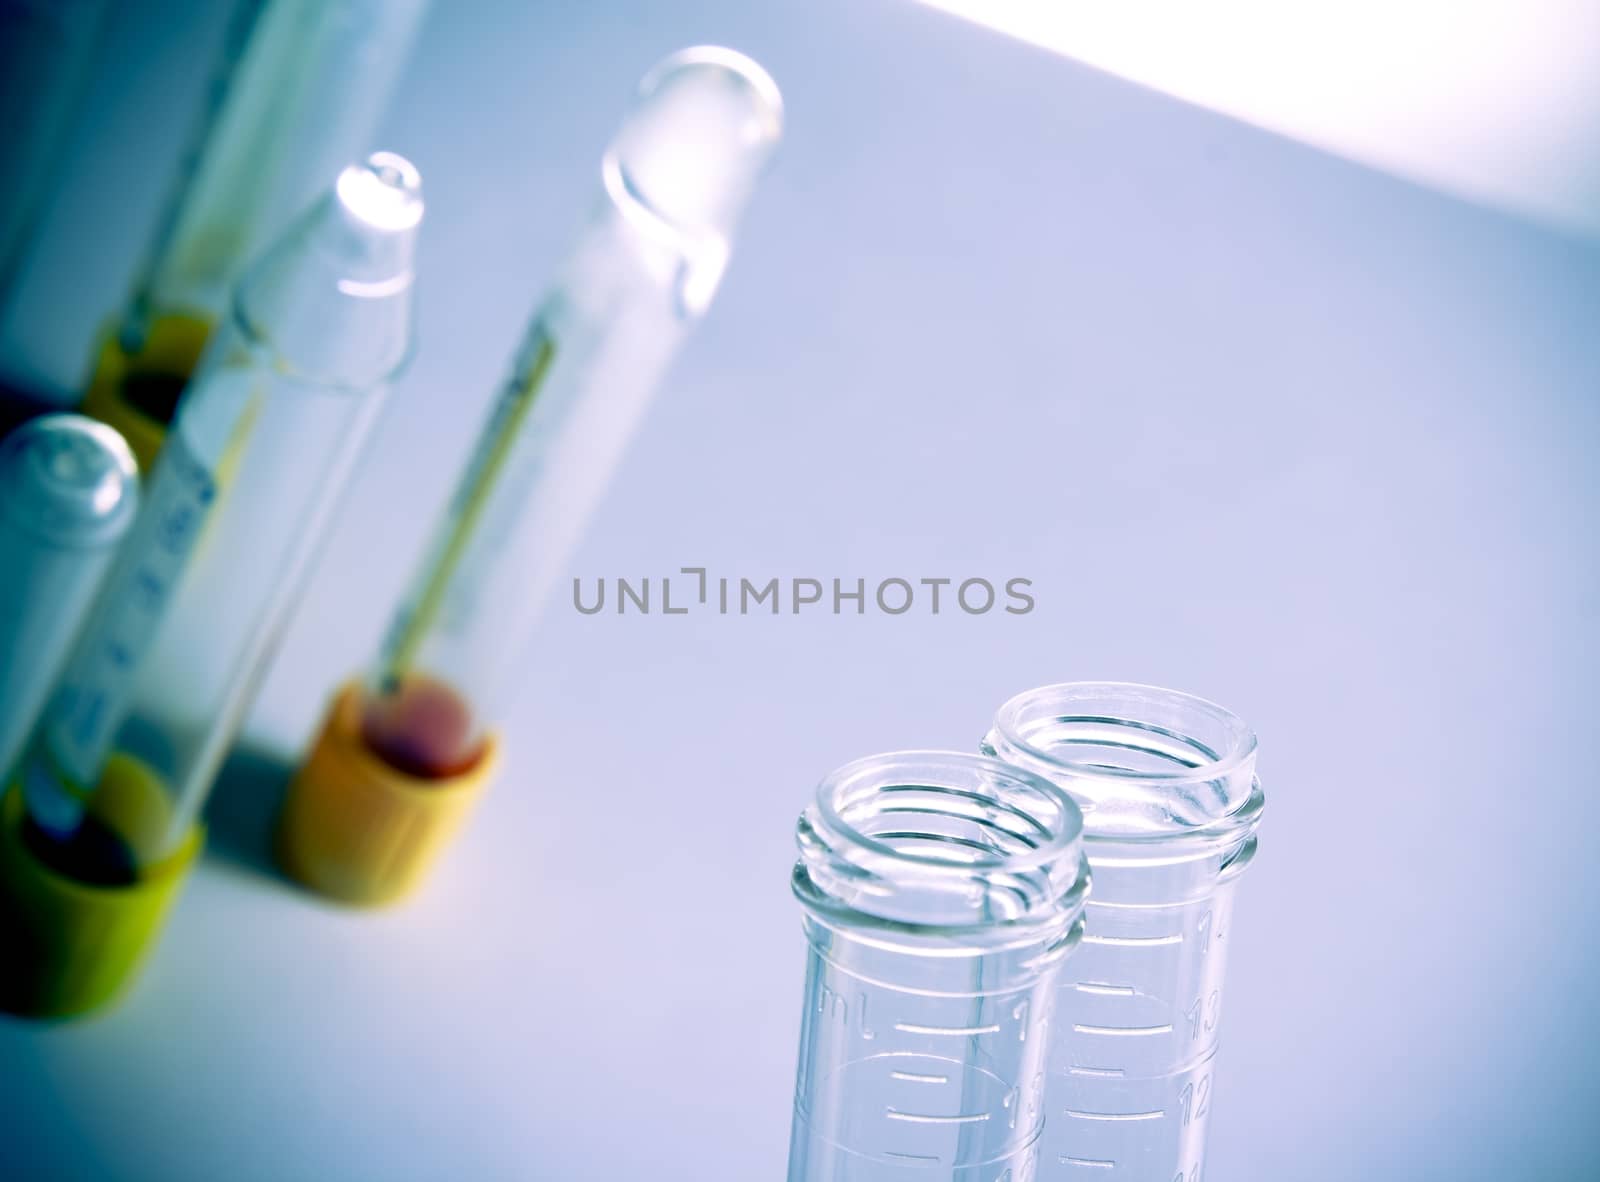 test tubes in hospital laboratory on table with space for text by donfiore